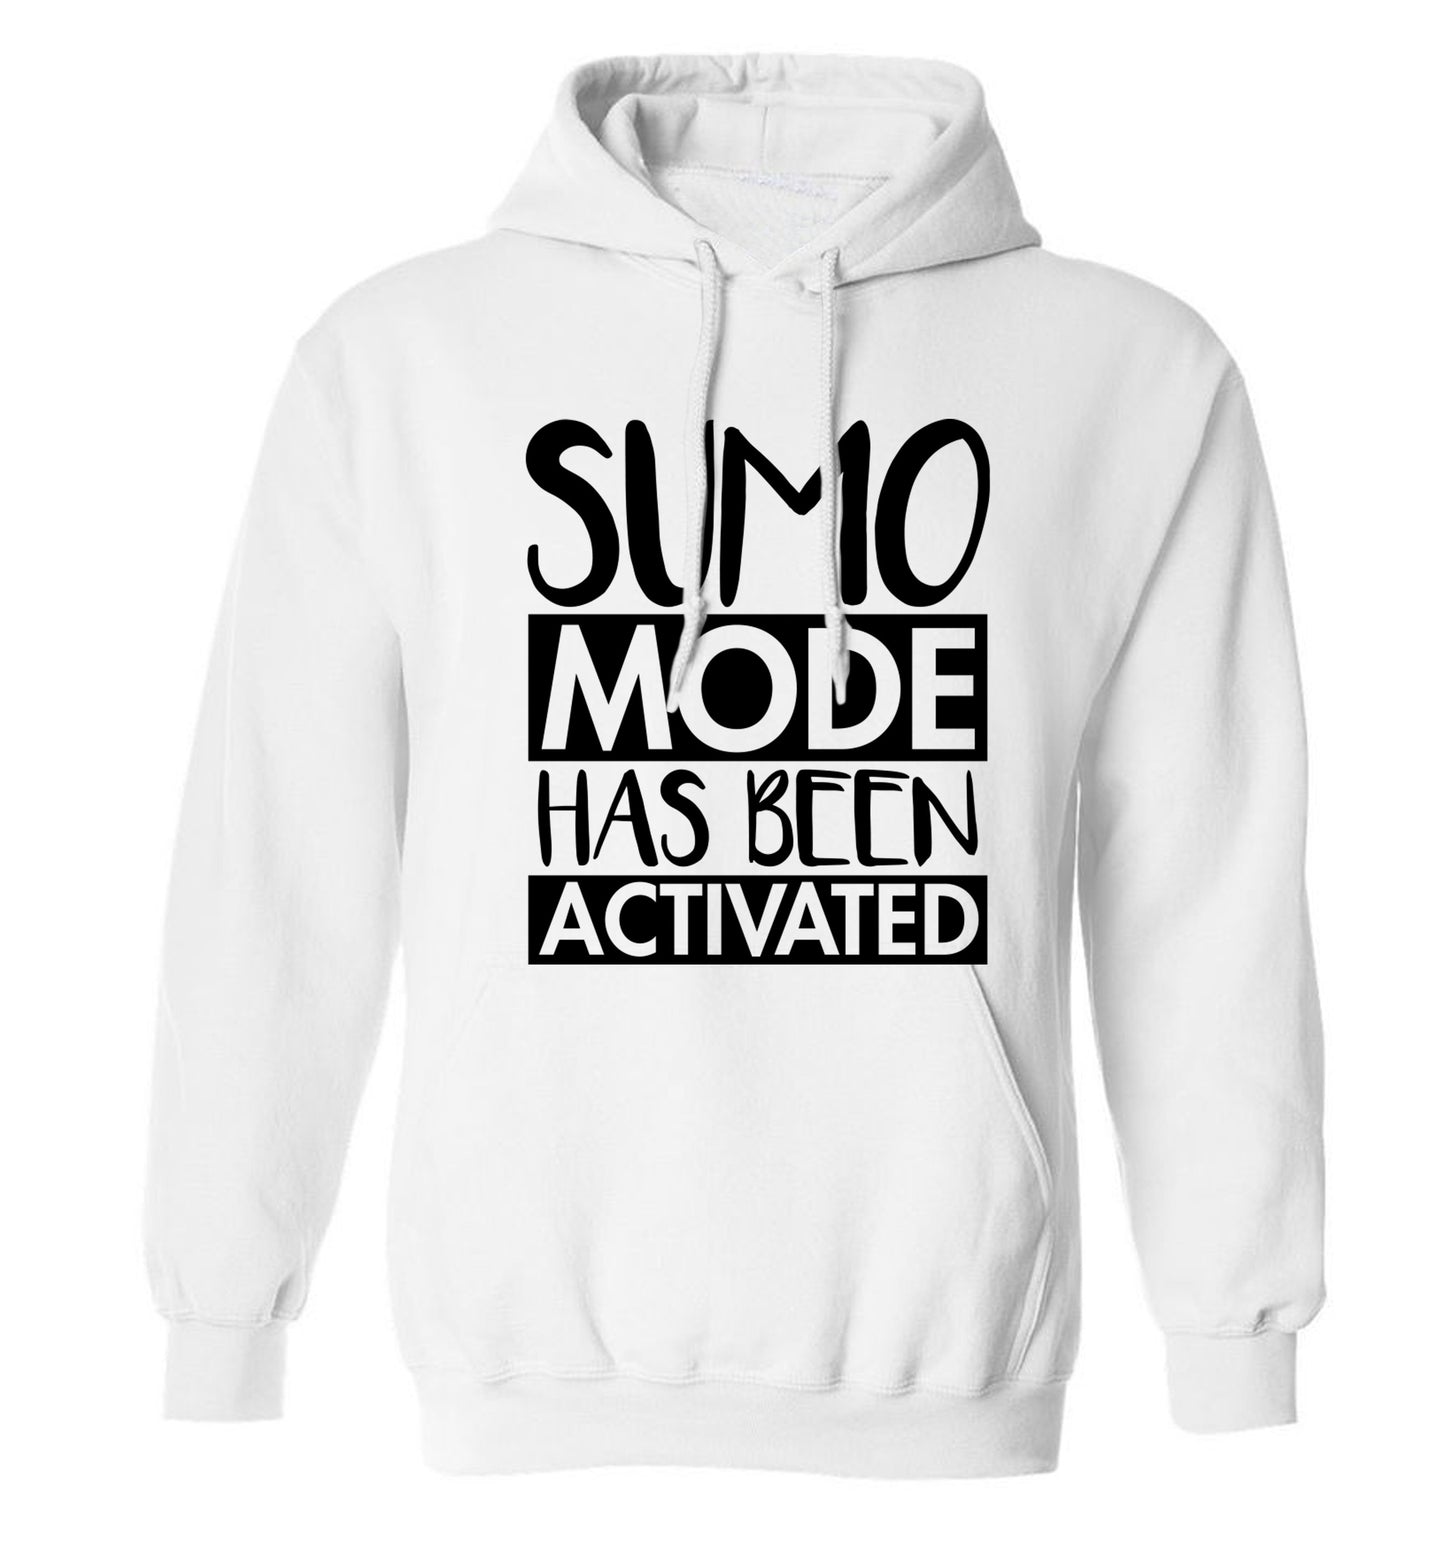 Sumo mode activated adults unisex white hoodie 2XL